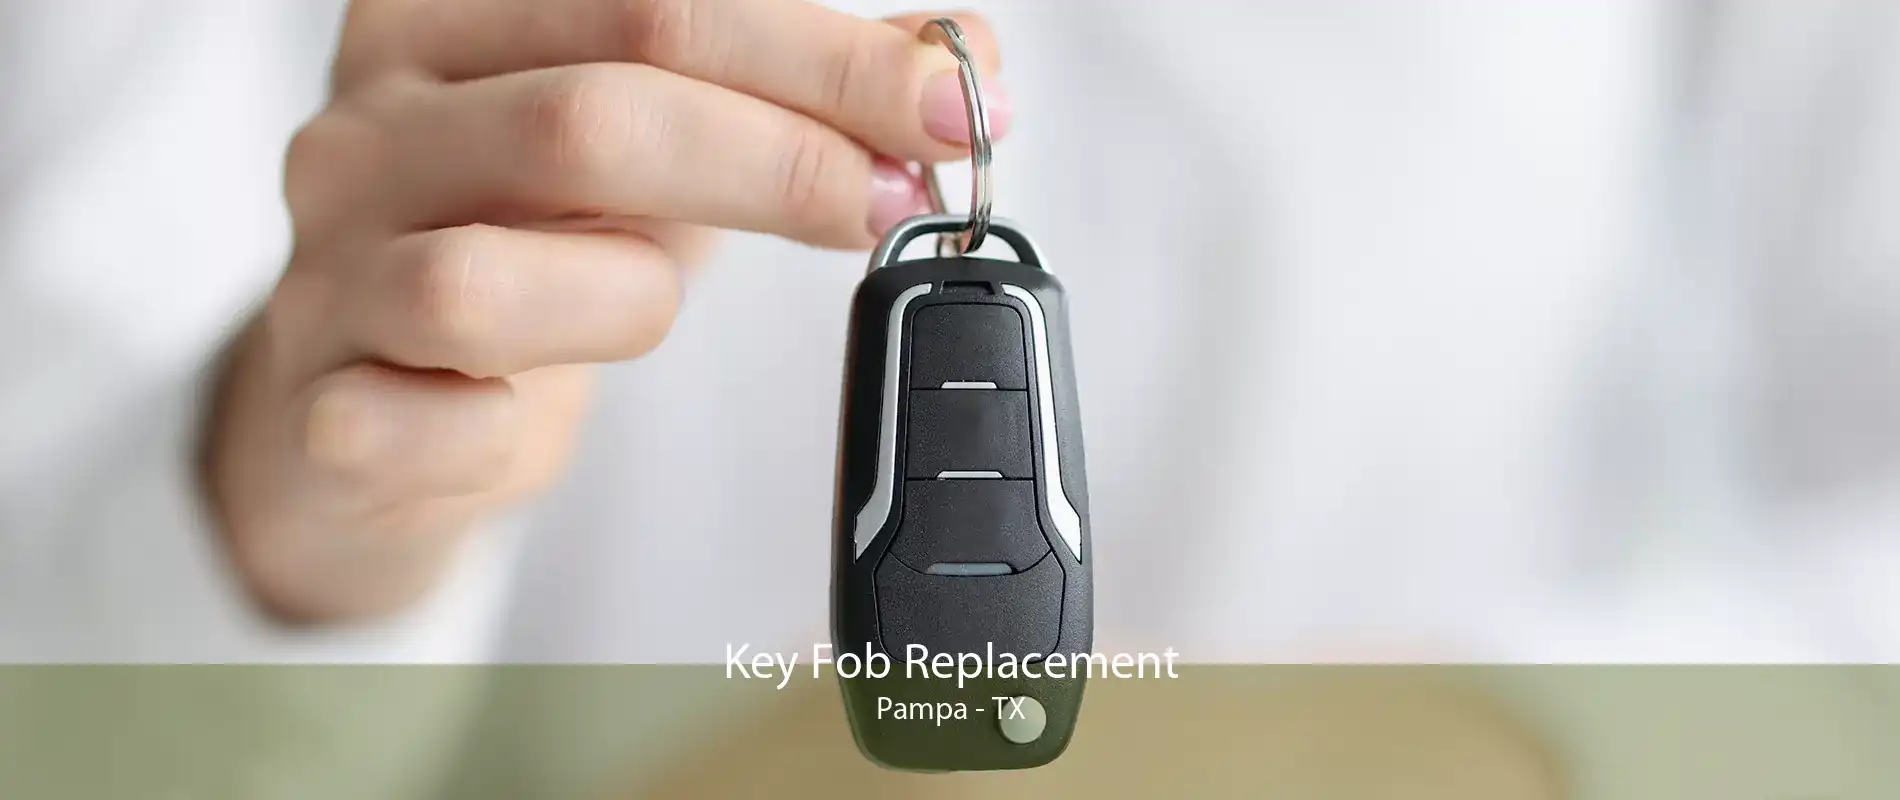 Key Fob Replacement Pampa - TX